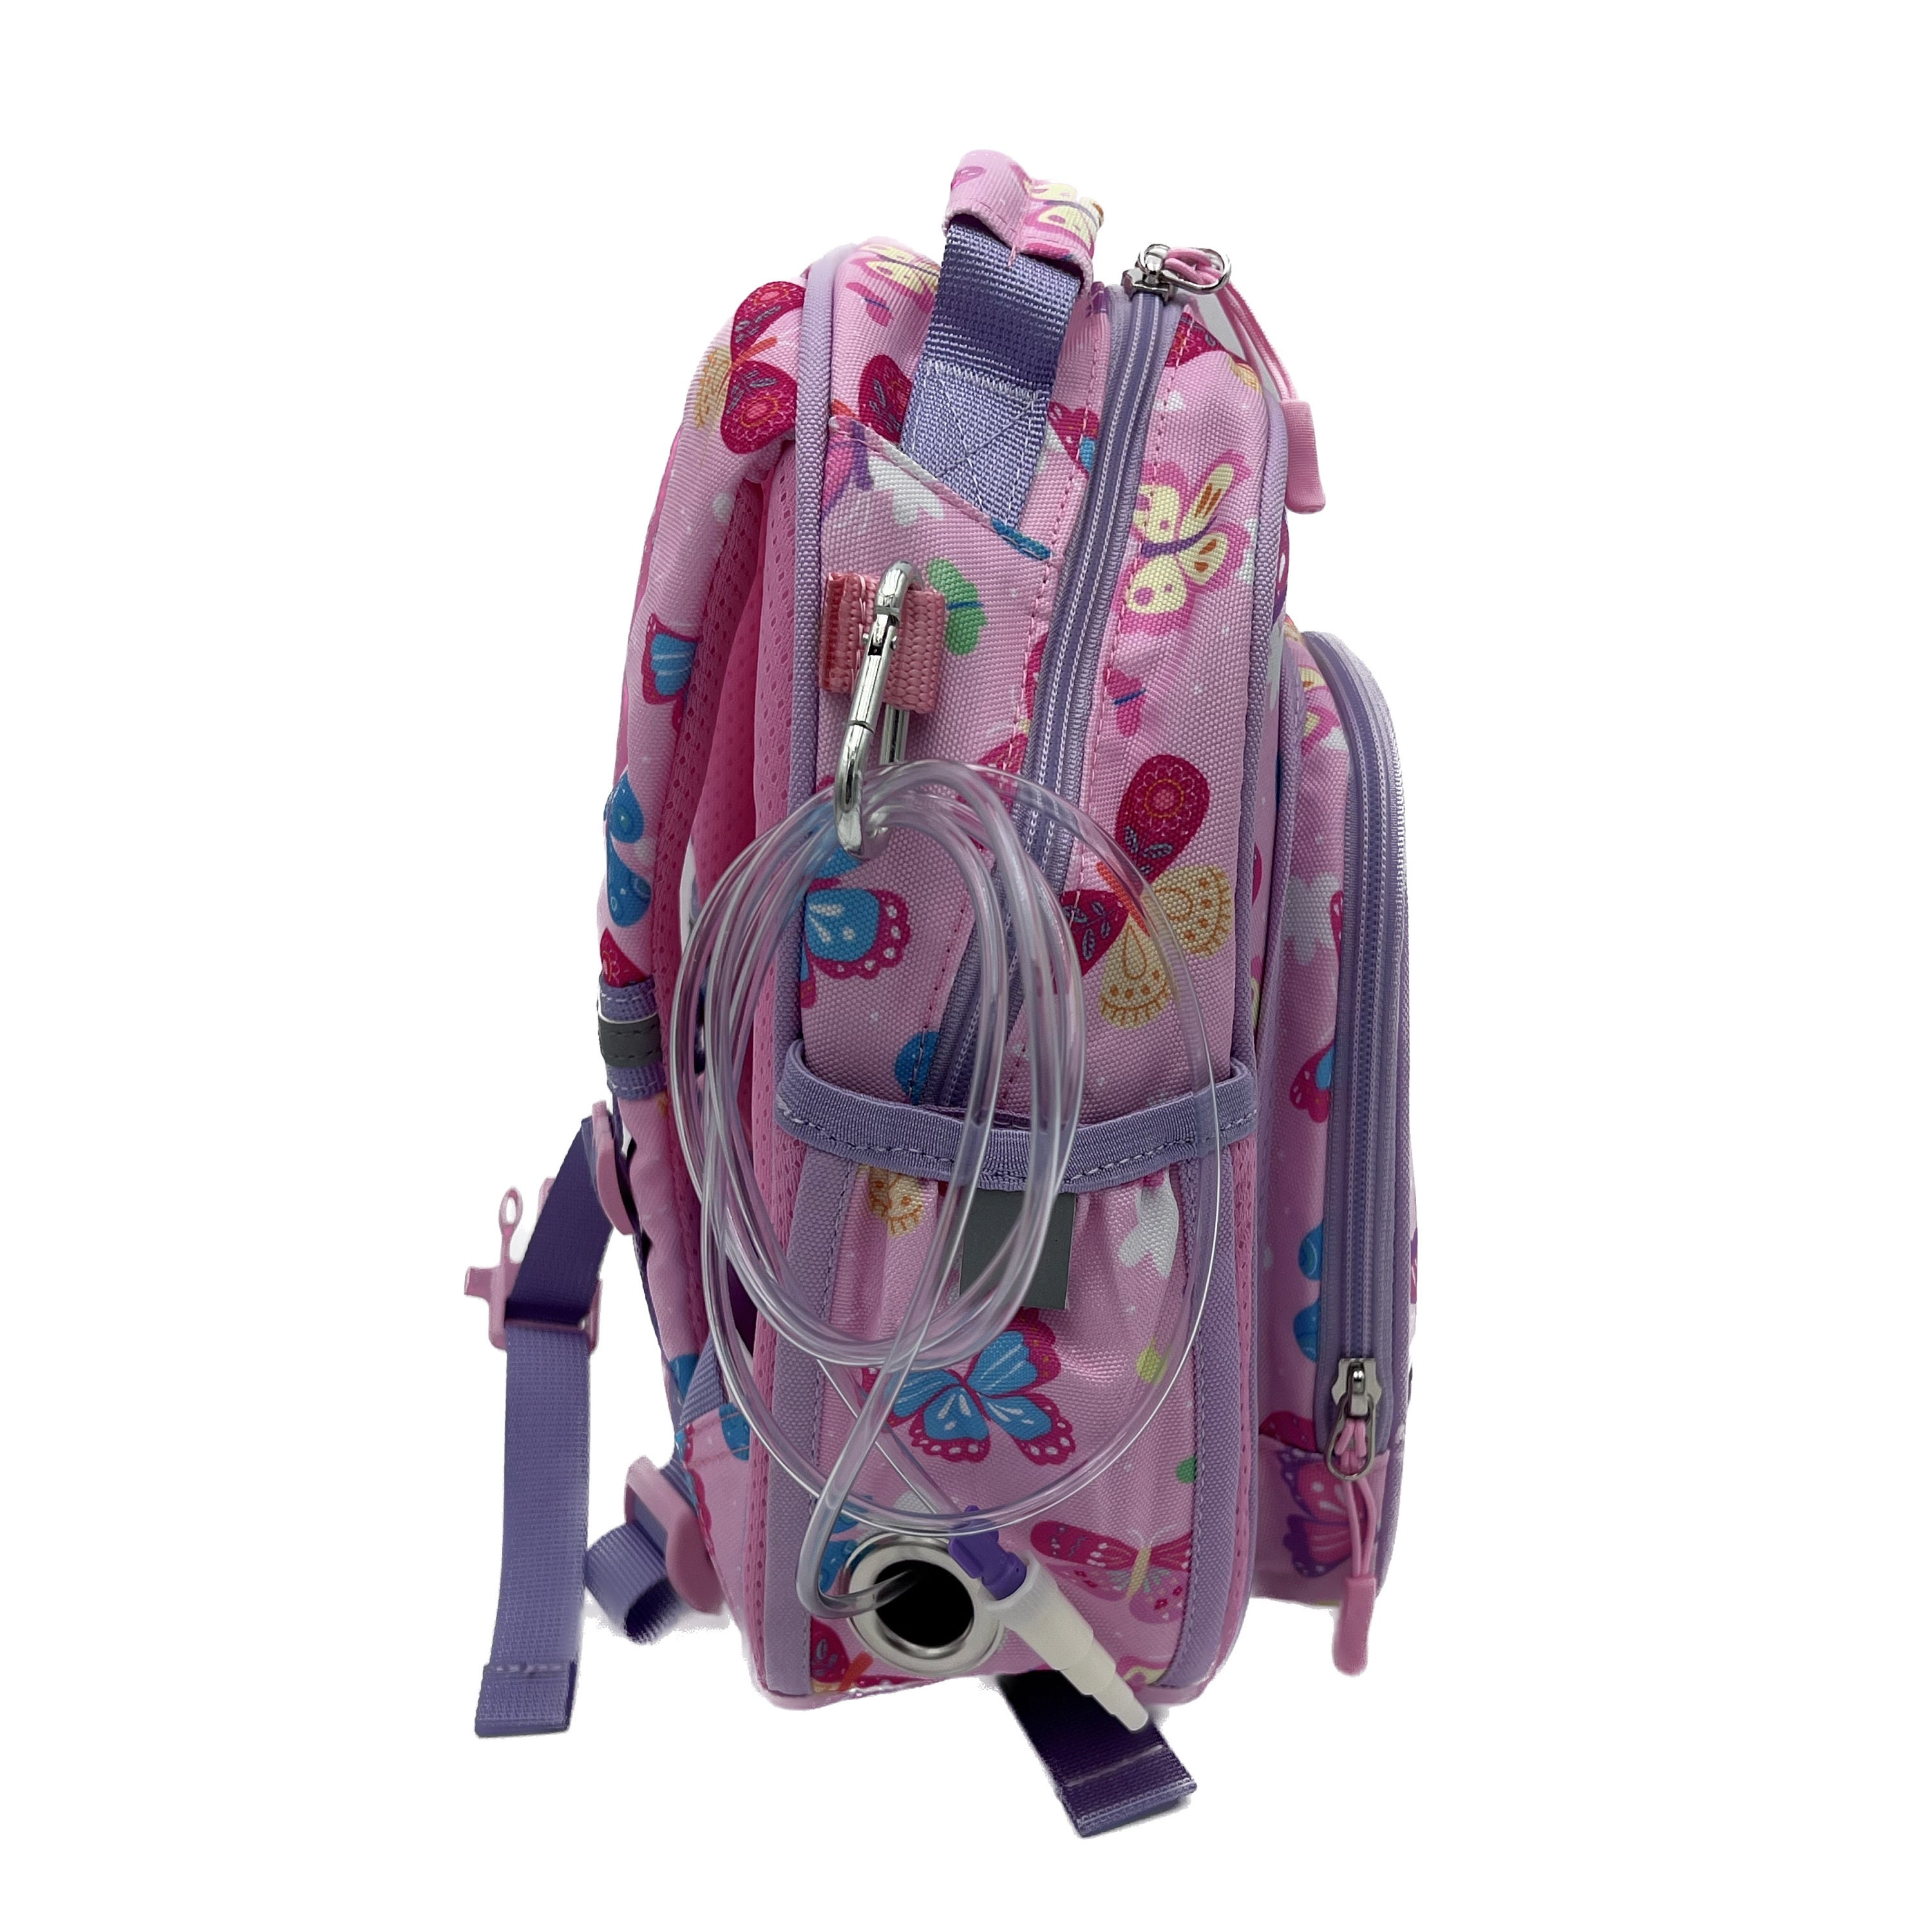 It was time for a new feeding tube backpack for our 11-year-old